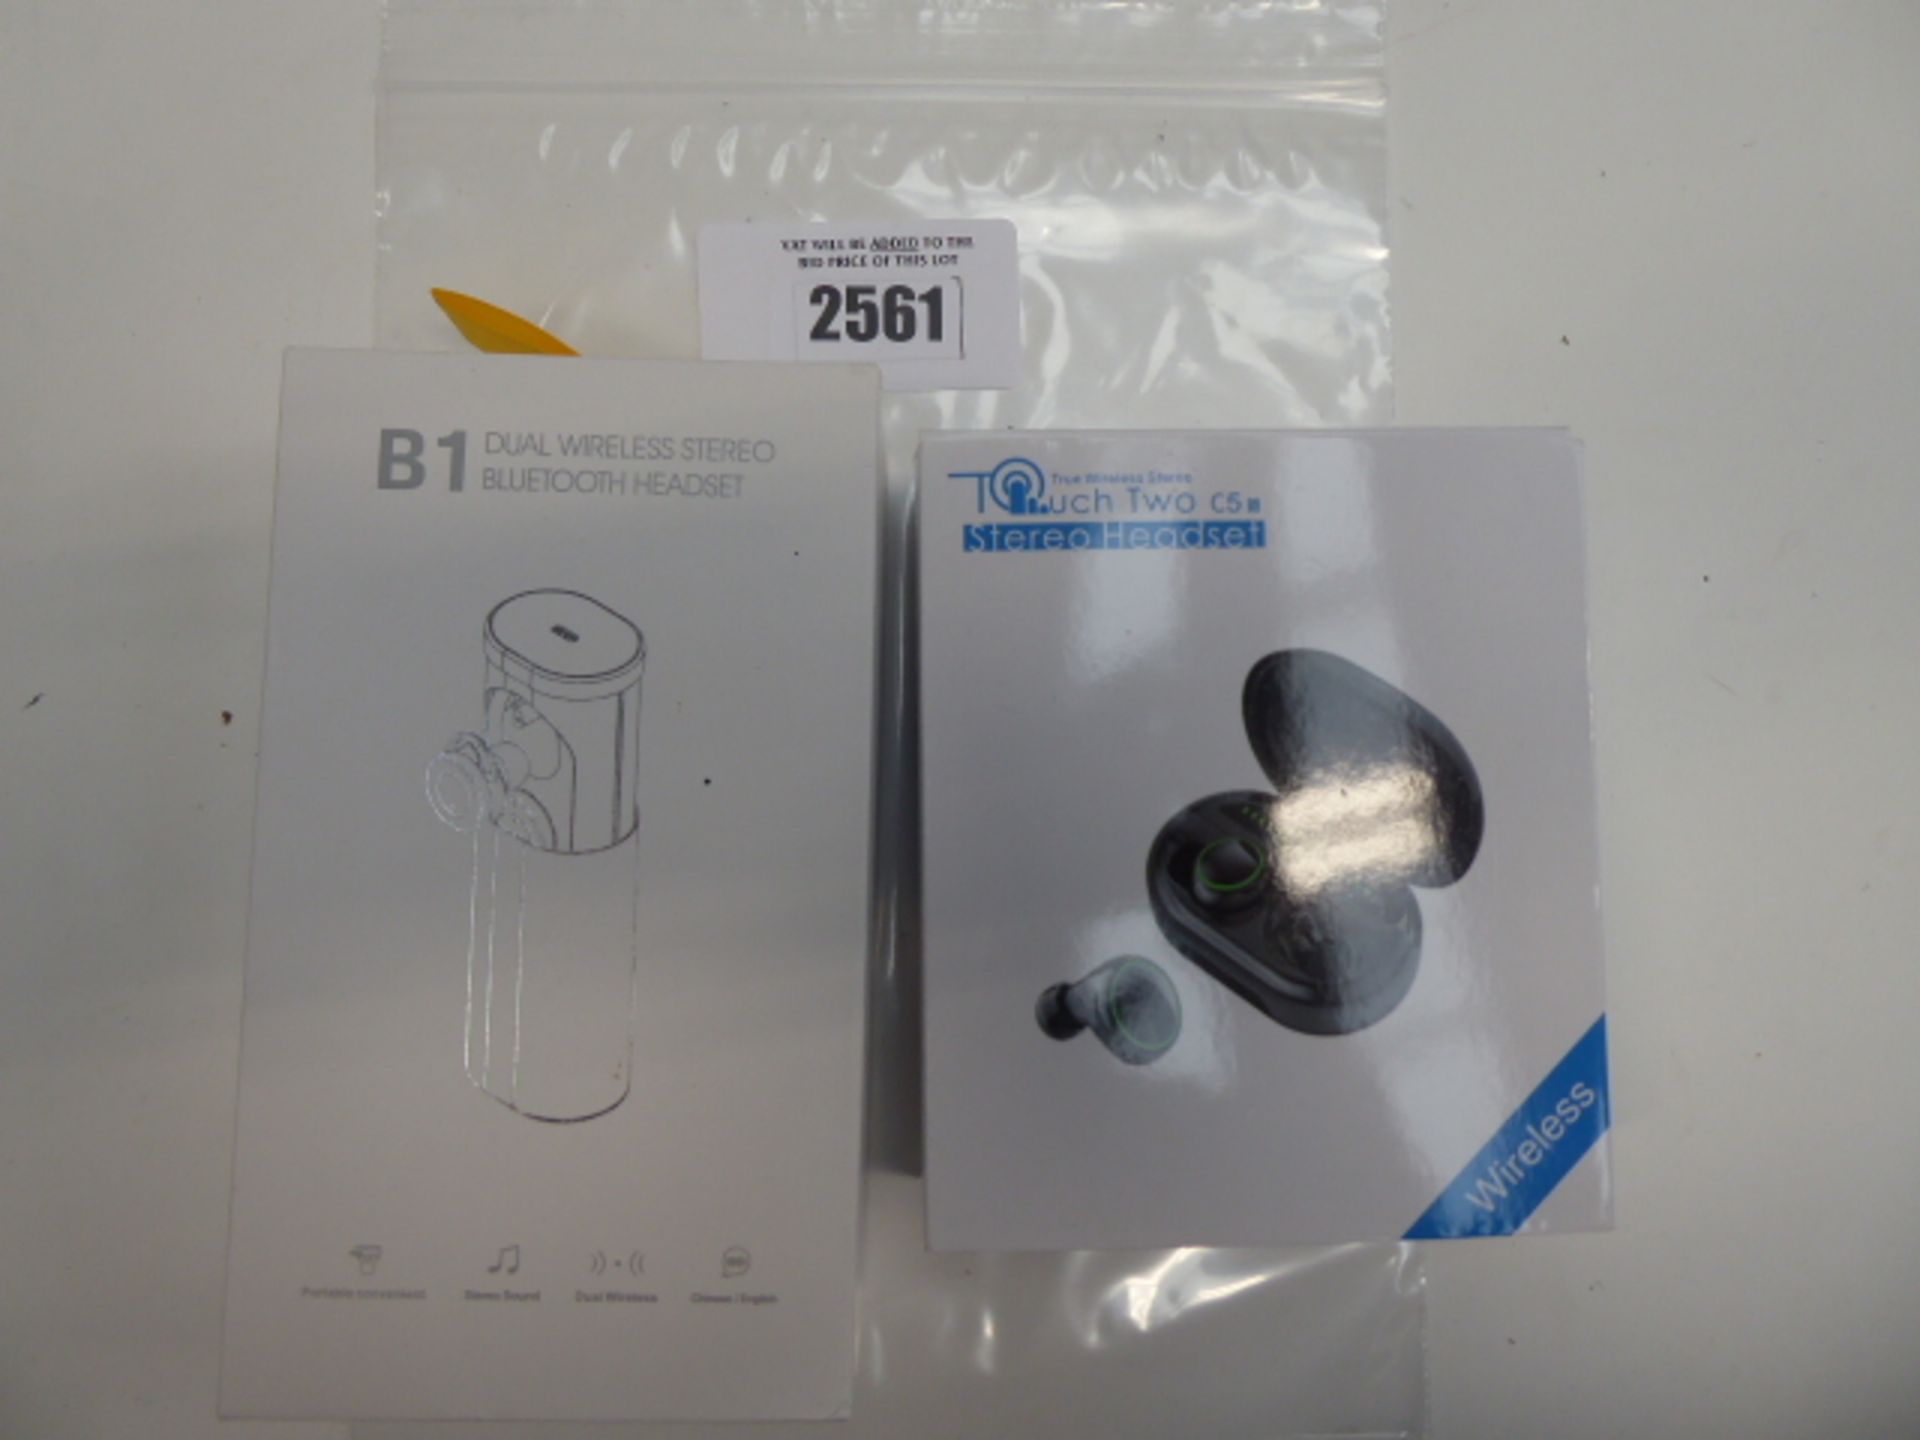 Touch Two C5 wireless earphones and B1 wireless headset